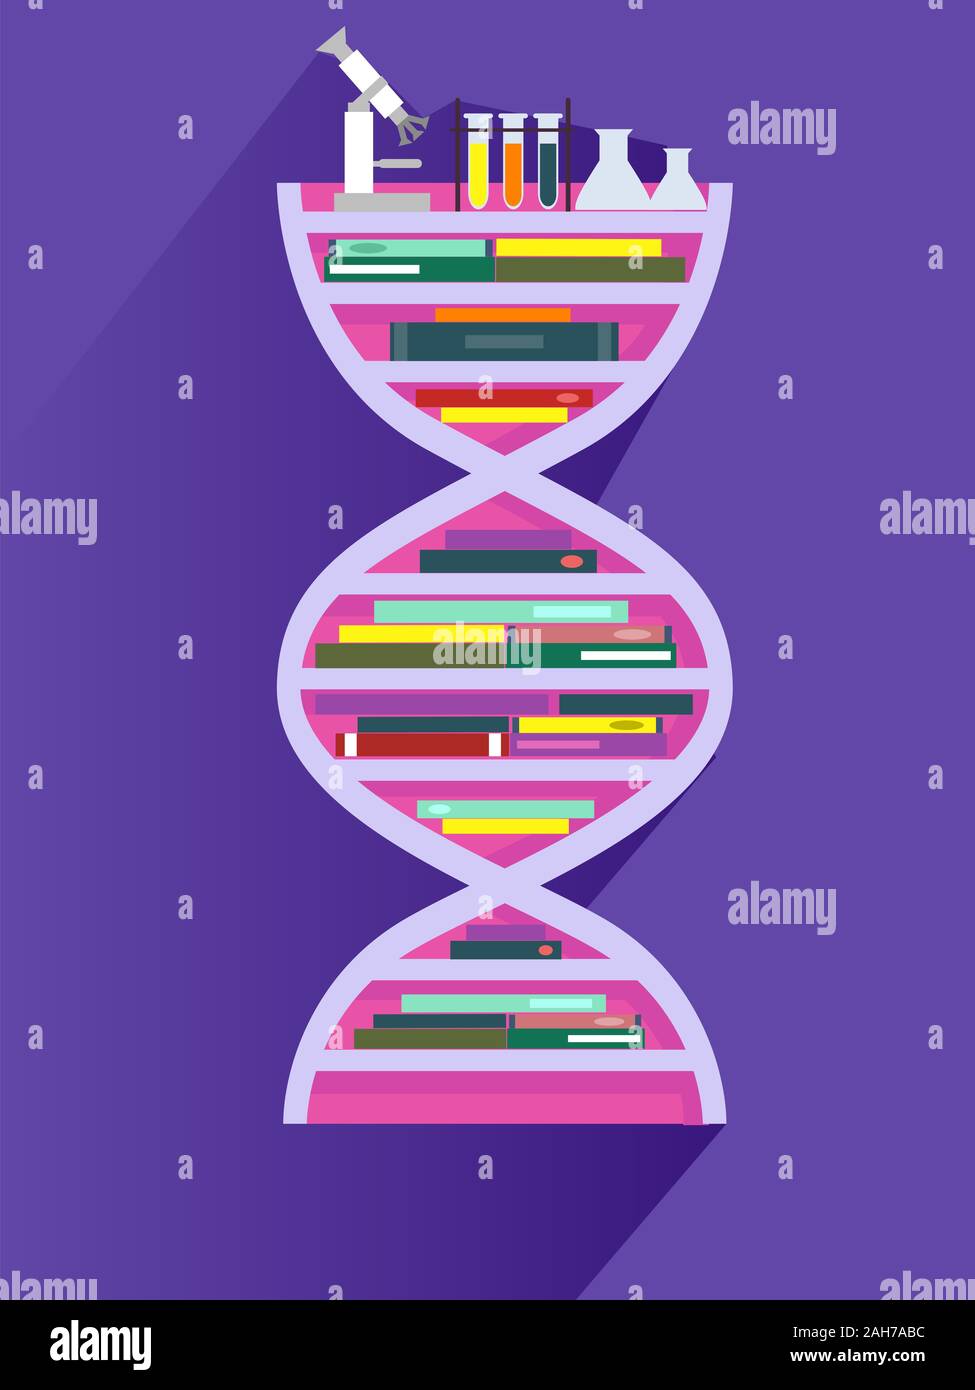 Illustration of a DNA Shaped Bookshelf Full of Books with Test Tubes,  Flasks and Microscope on Top Shelf Stock Photo - Alamy